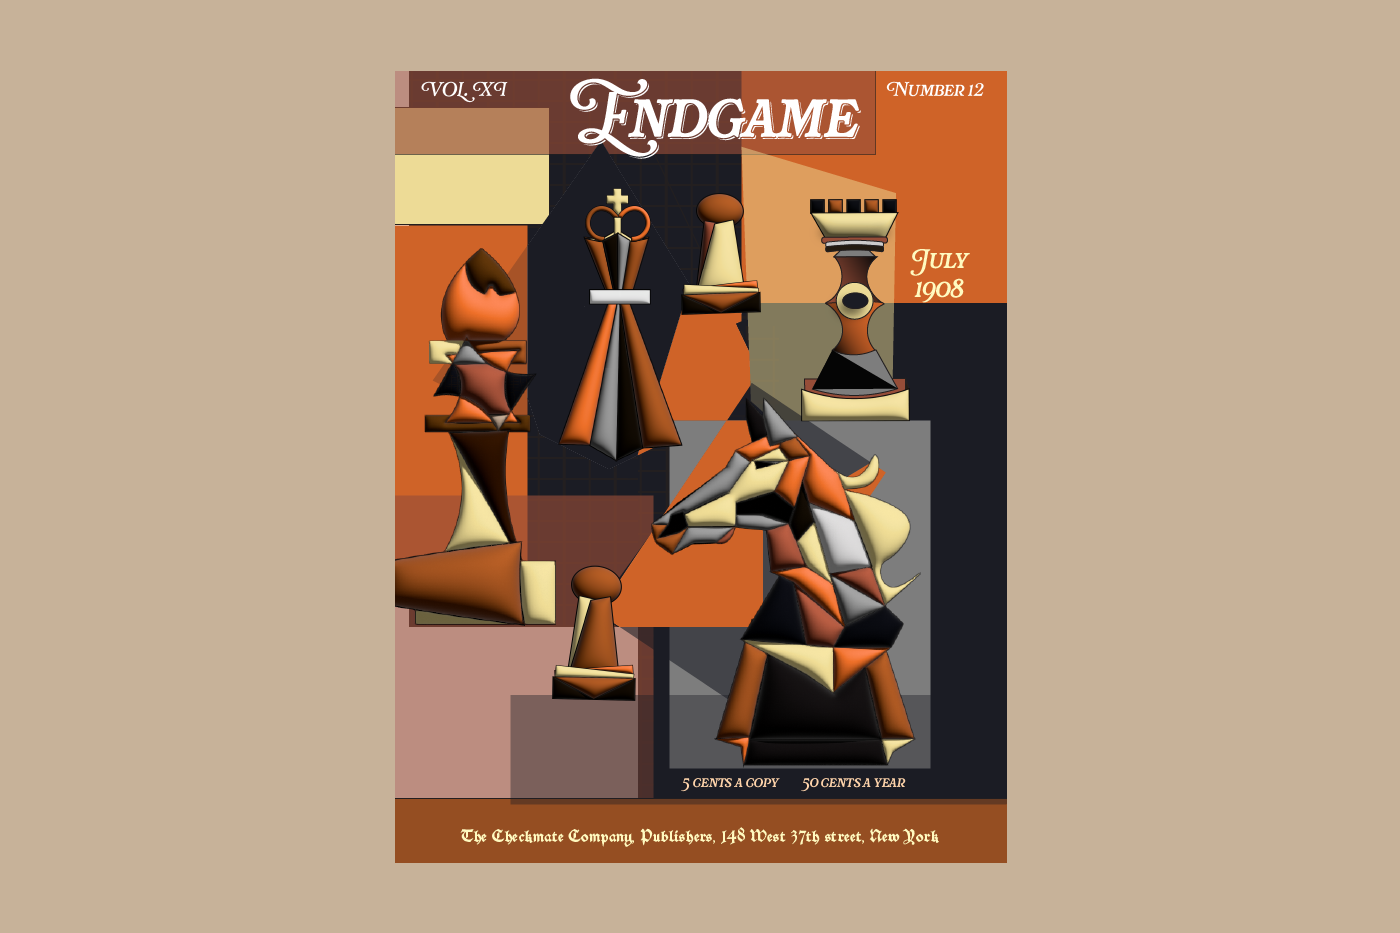 Fictional chess magazine cover that draws on elements of early 20th century cubism. 
